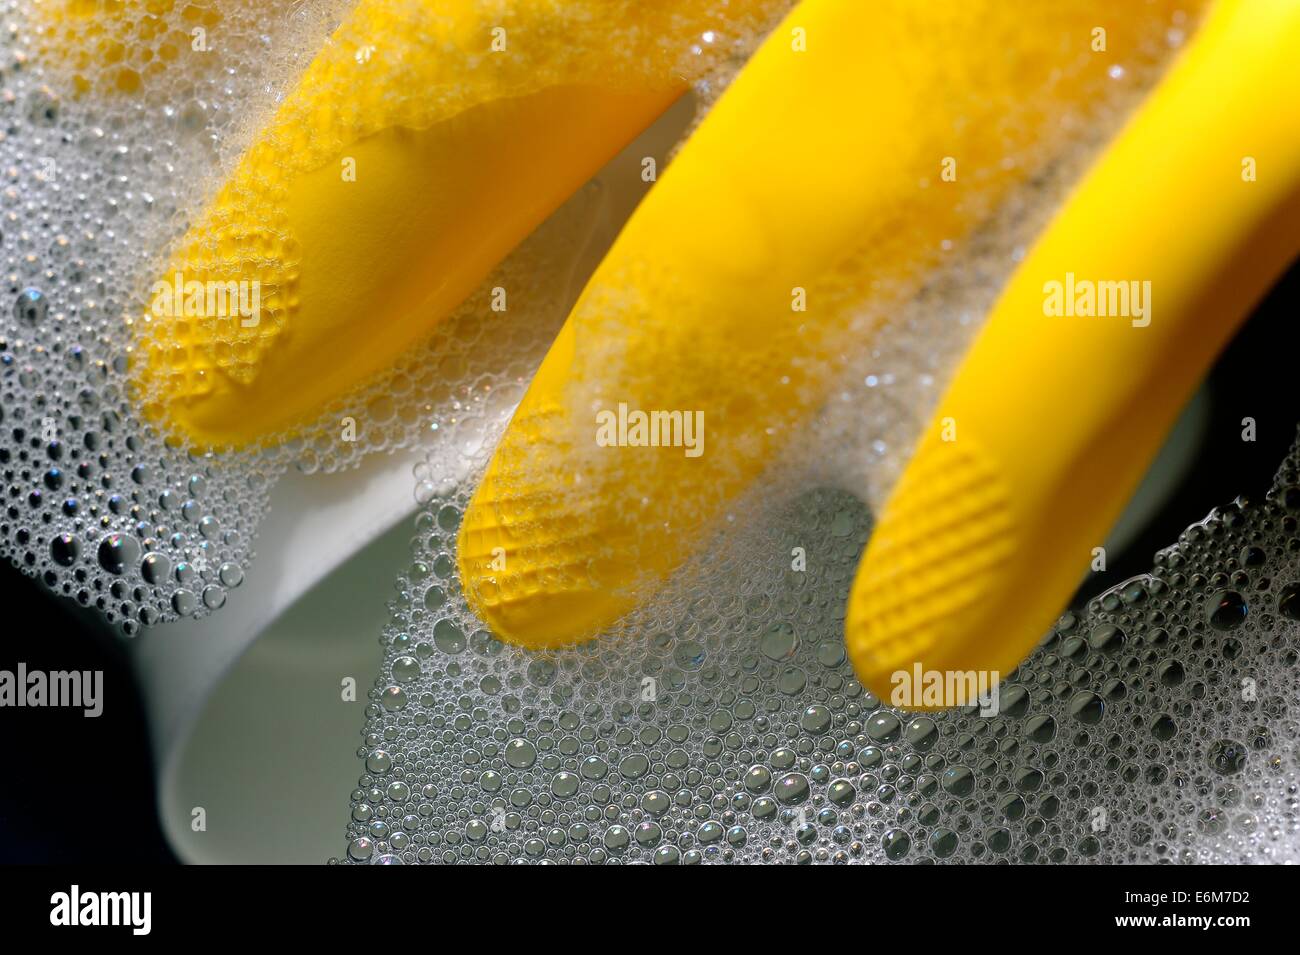 Yellow latex rubber gloves Stock Photo